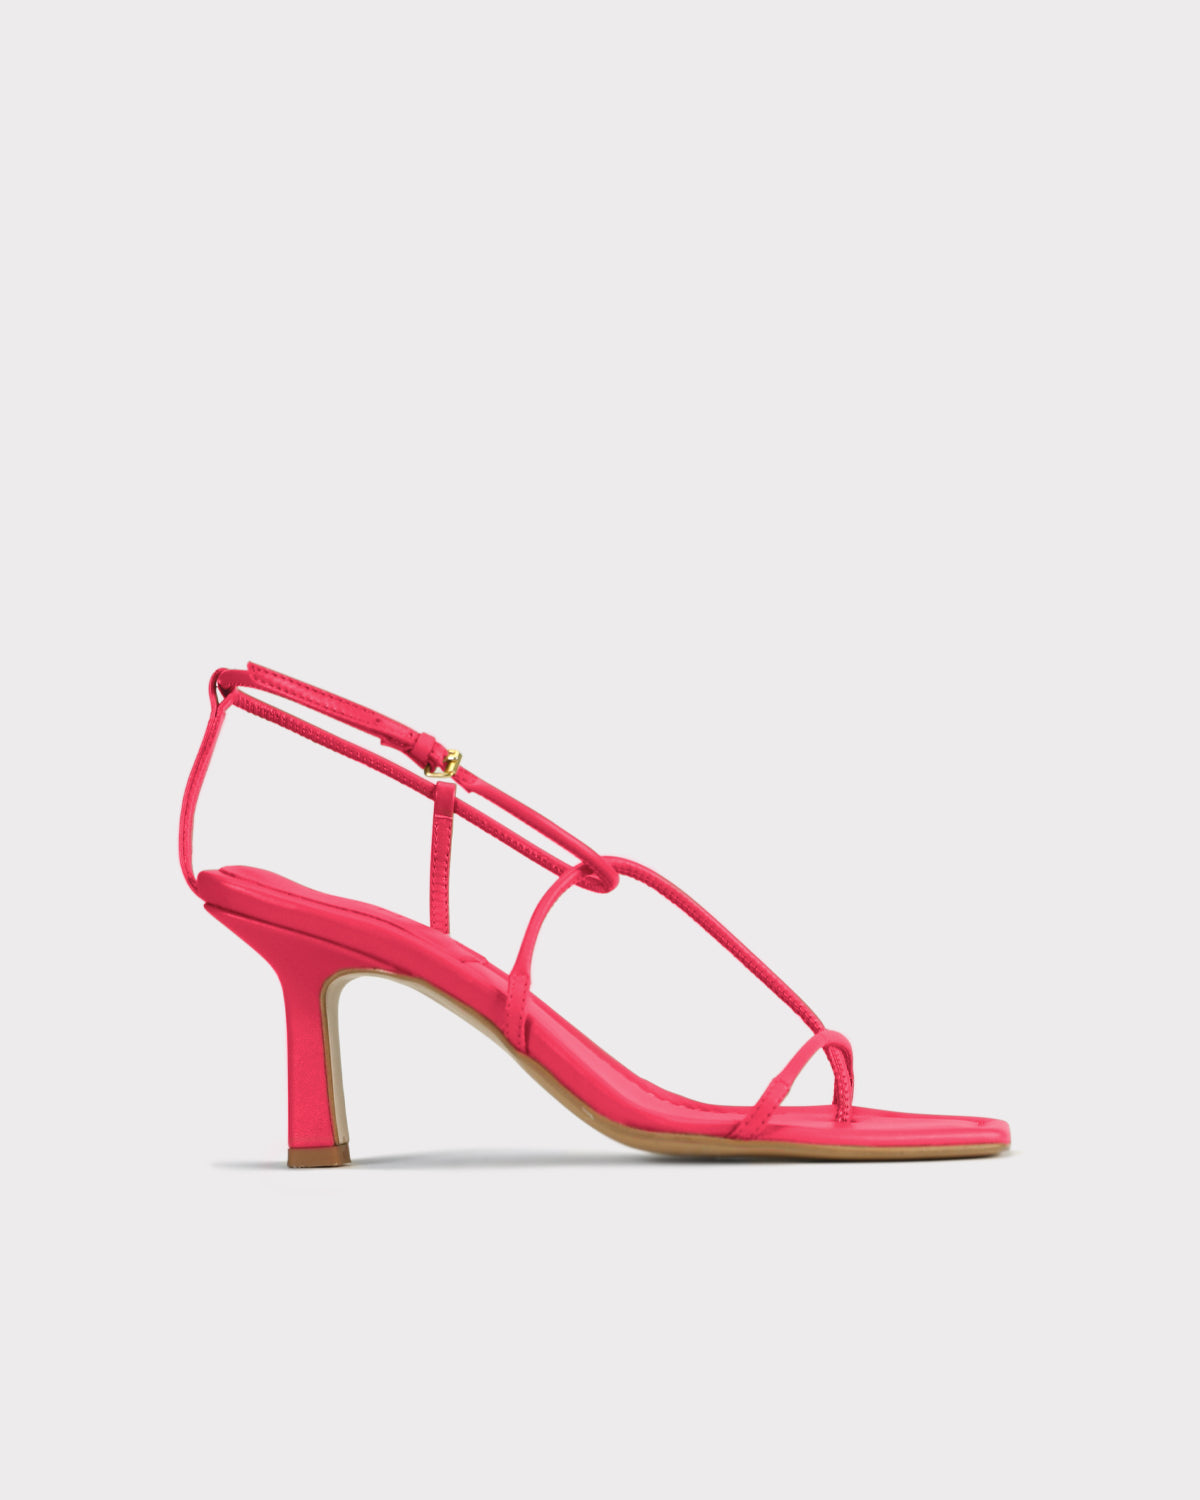 ethical leather strappy evening shoe in red 